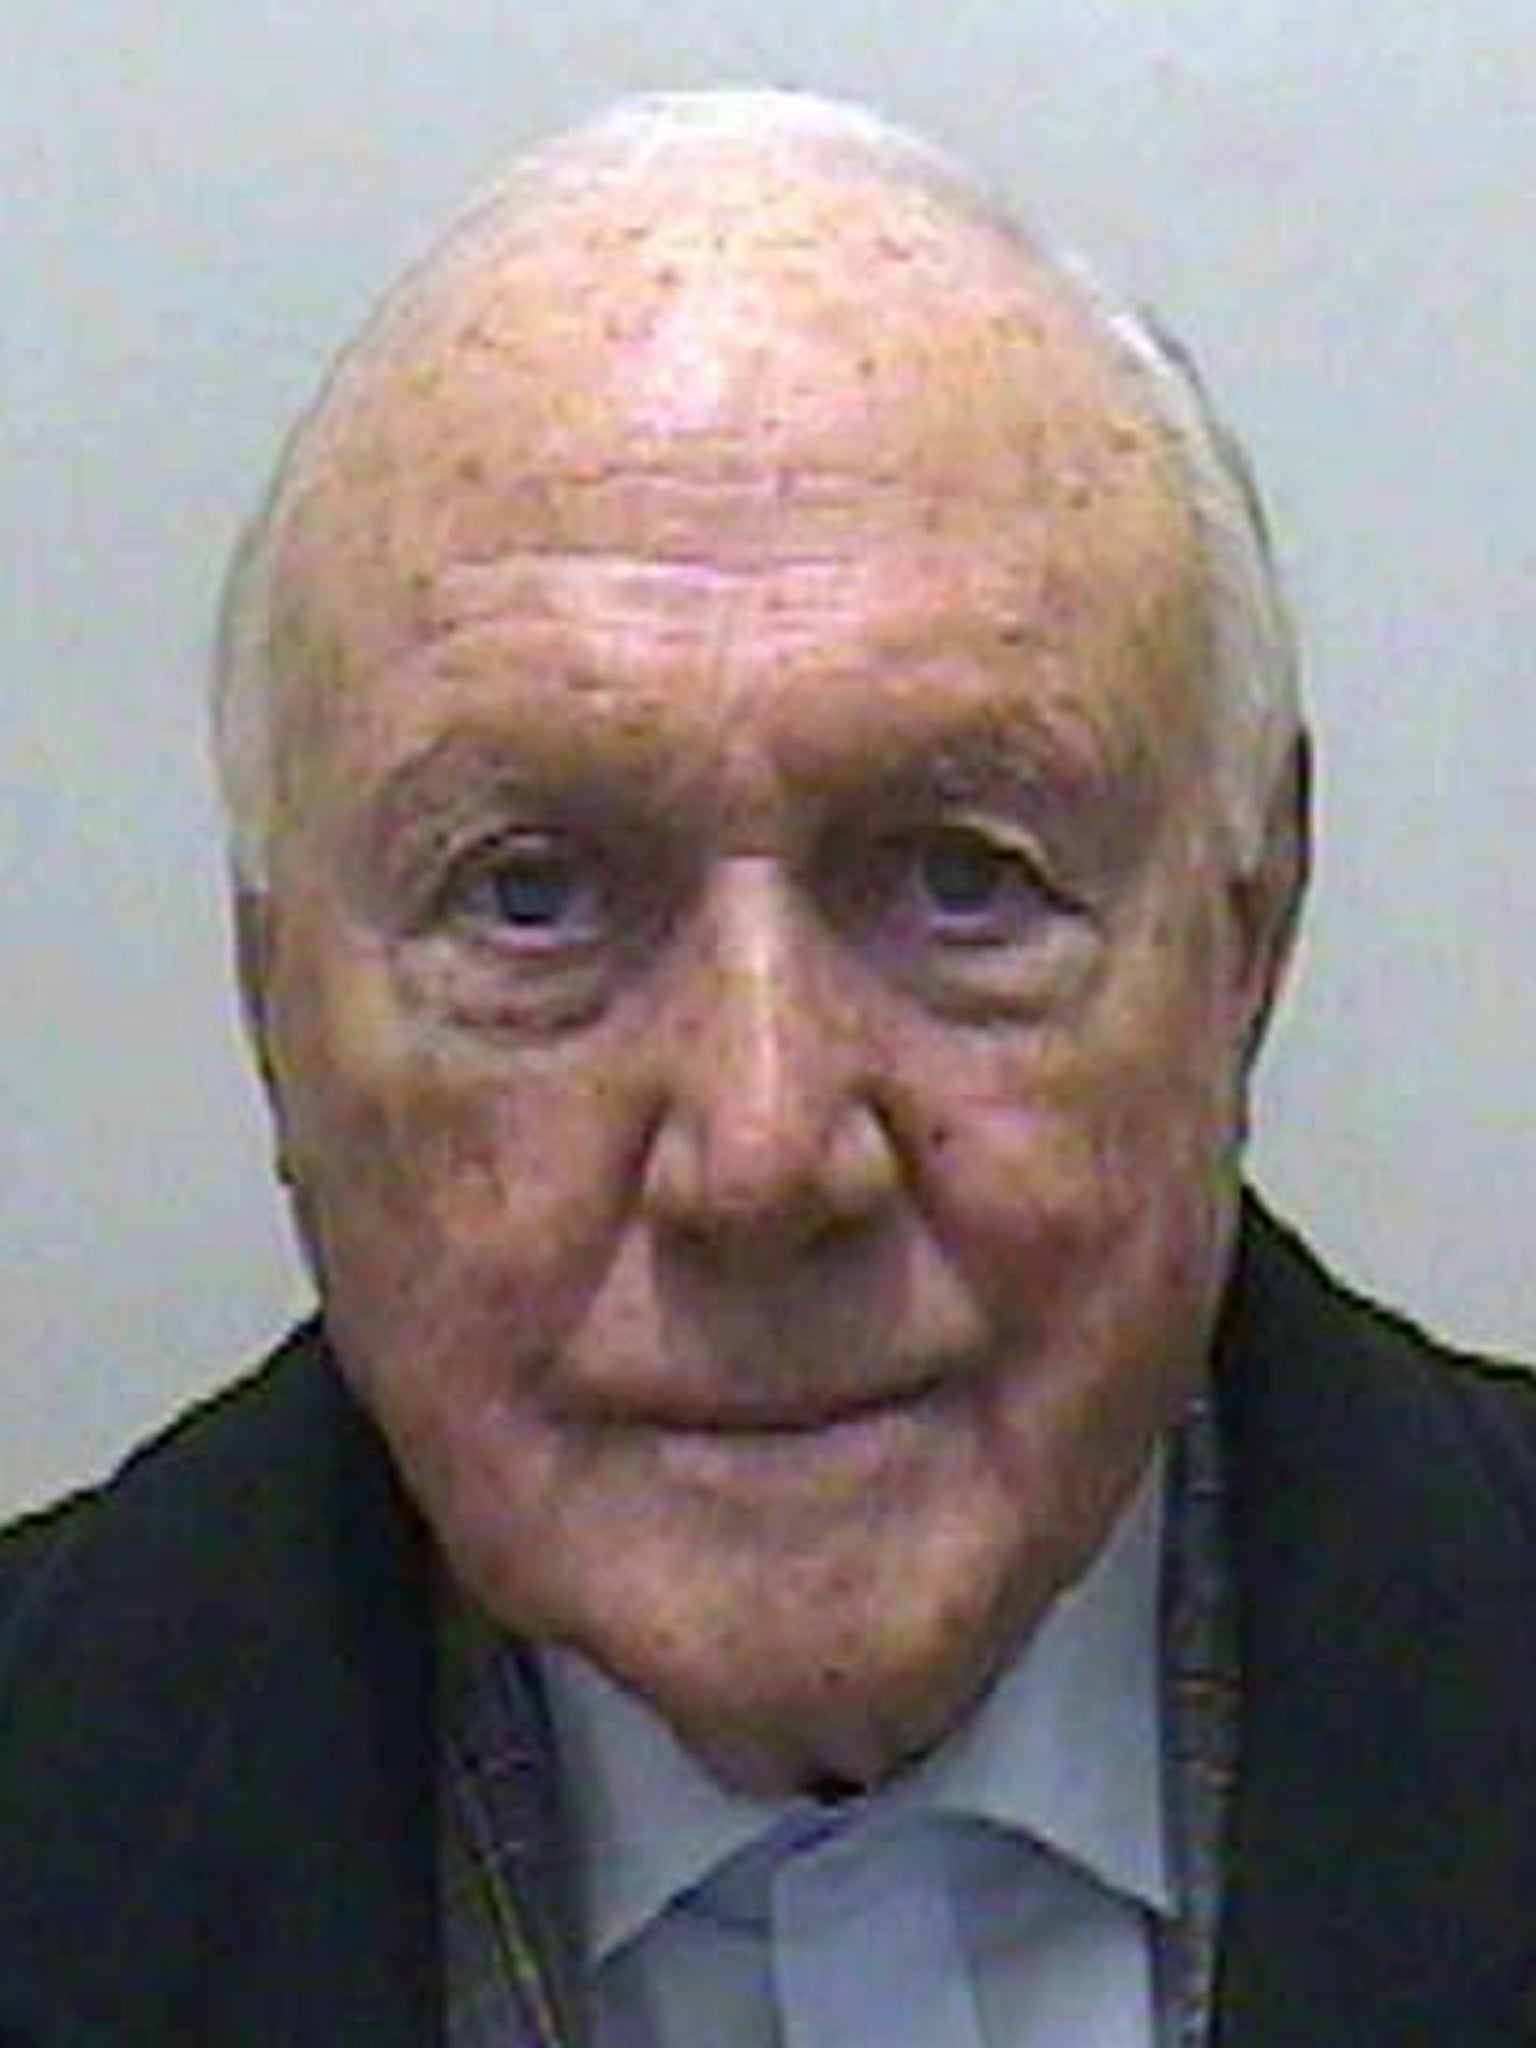 Stuart Hall is currently serving a 30-month jail term for sexually abusing 13 victims